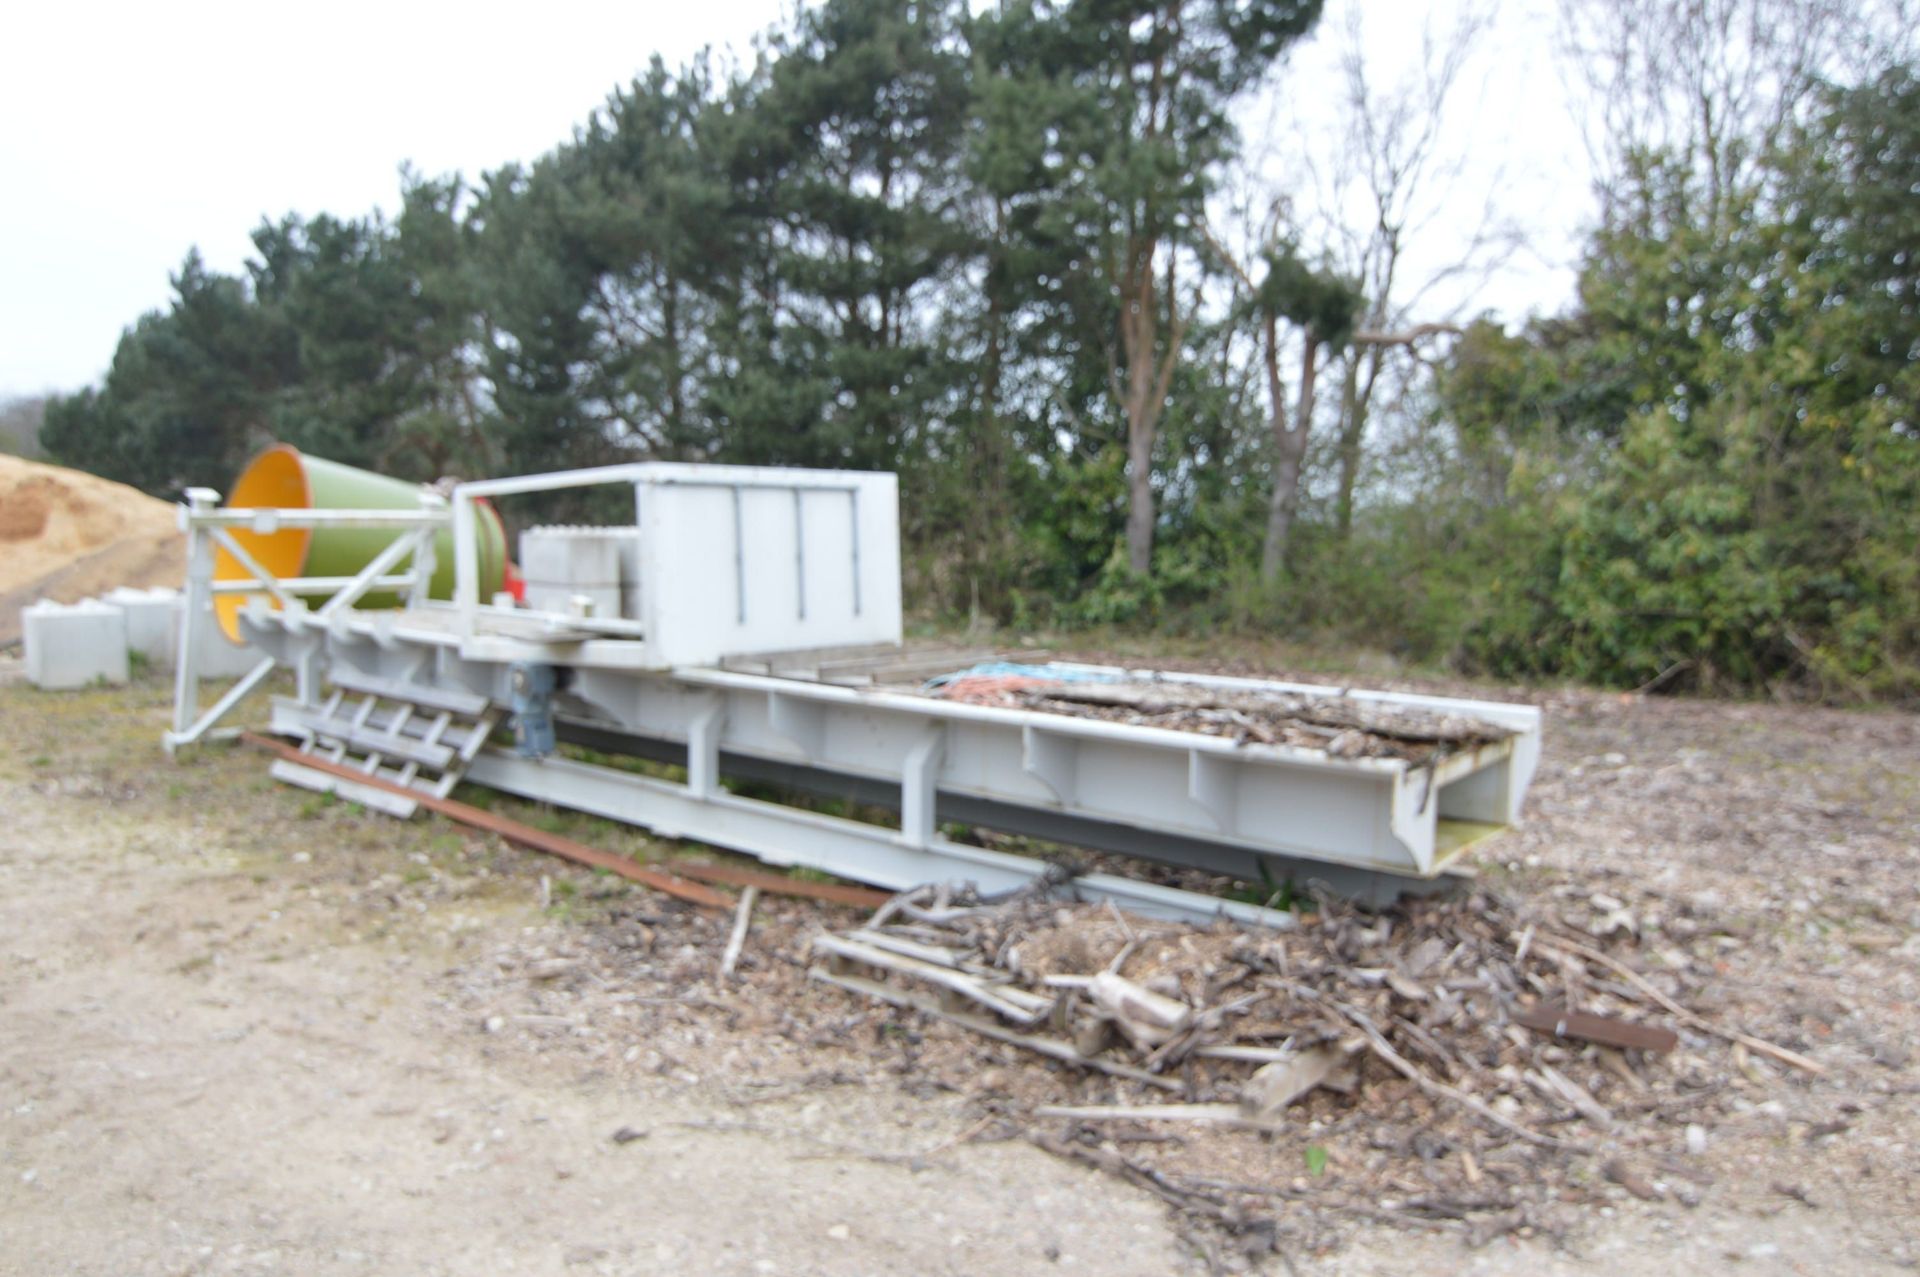 Passat STRAW BALE SHREDDER, with hopper, steel frame supports and conveyor feed unit (no chain), - Bild 11 aus 14